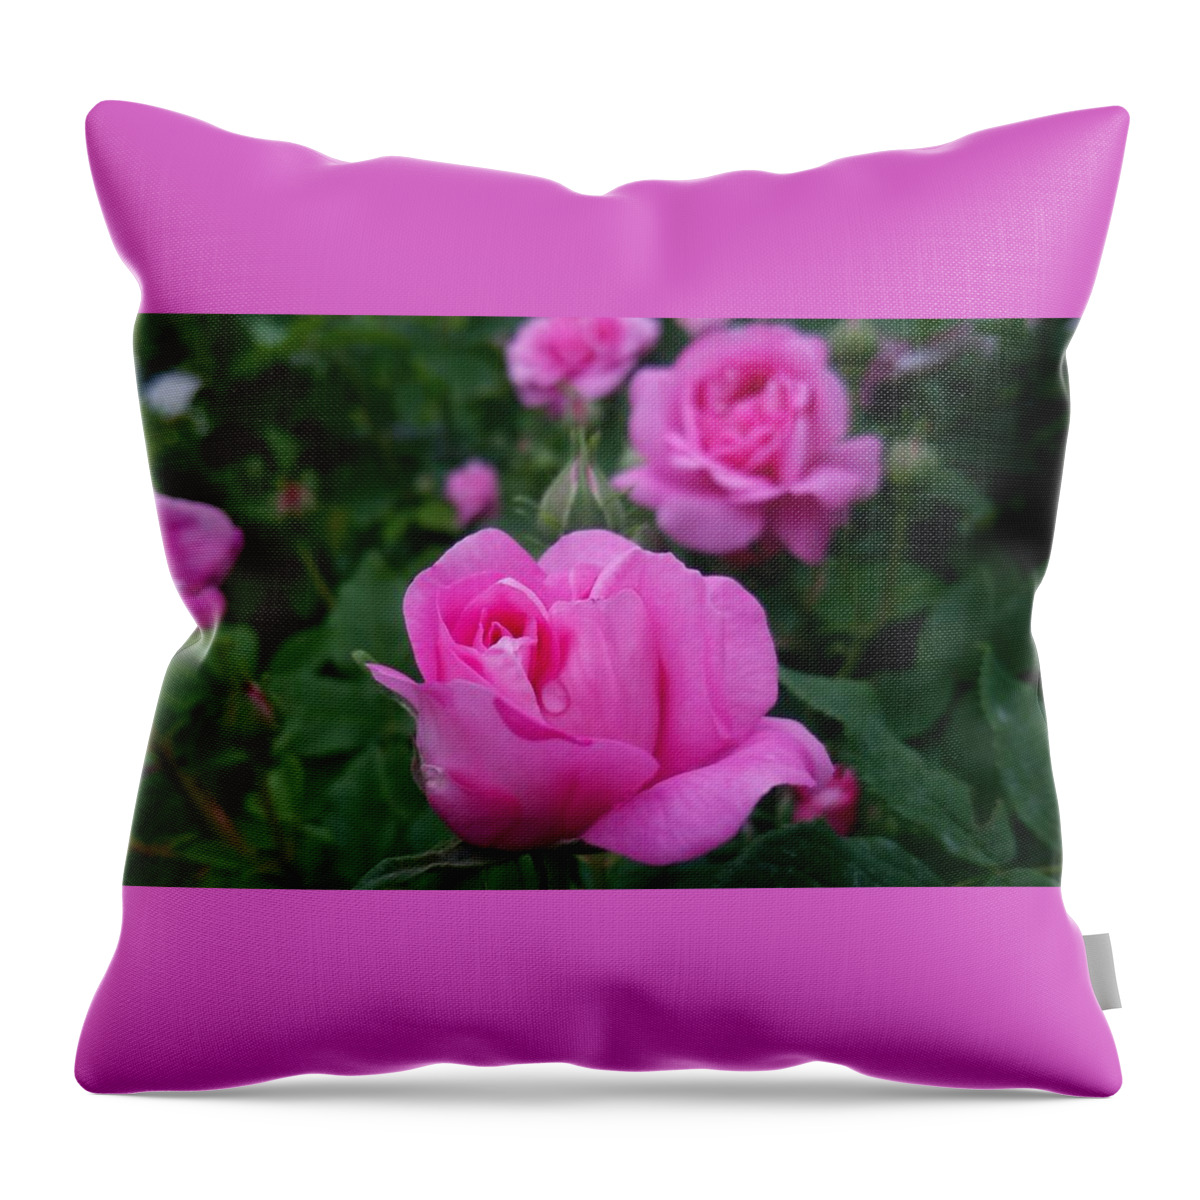 #flower#flowerlovers#flowerlover#green#flowerlovers#floral#rose#rosa#pink#petal#plant#blossom#photooftheday#floweroftheday#webstagram#naturestagram#flowerstagram#naturelover#naturelovers#naturehippys#naturehippy#flowers#furano#hokkaido#japan#kn##xǖ#kc#{ Throw Pillow featuring the photograph Rose #21 by Tomoko Takigawa